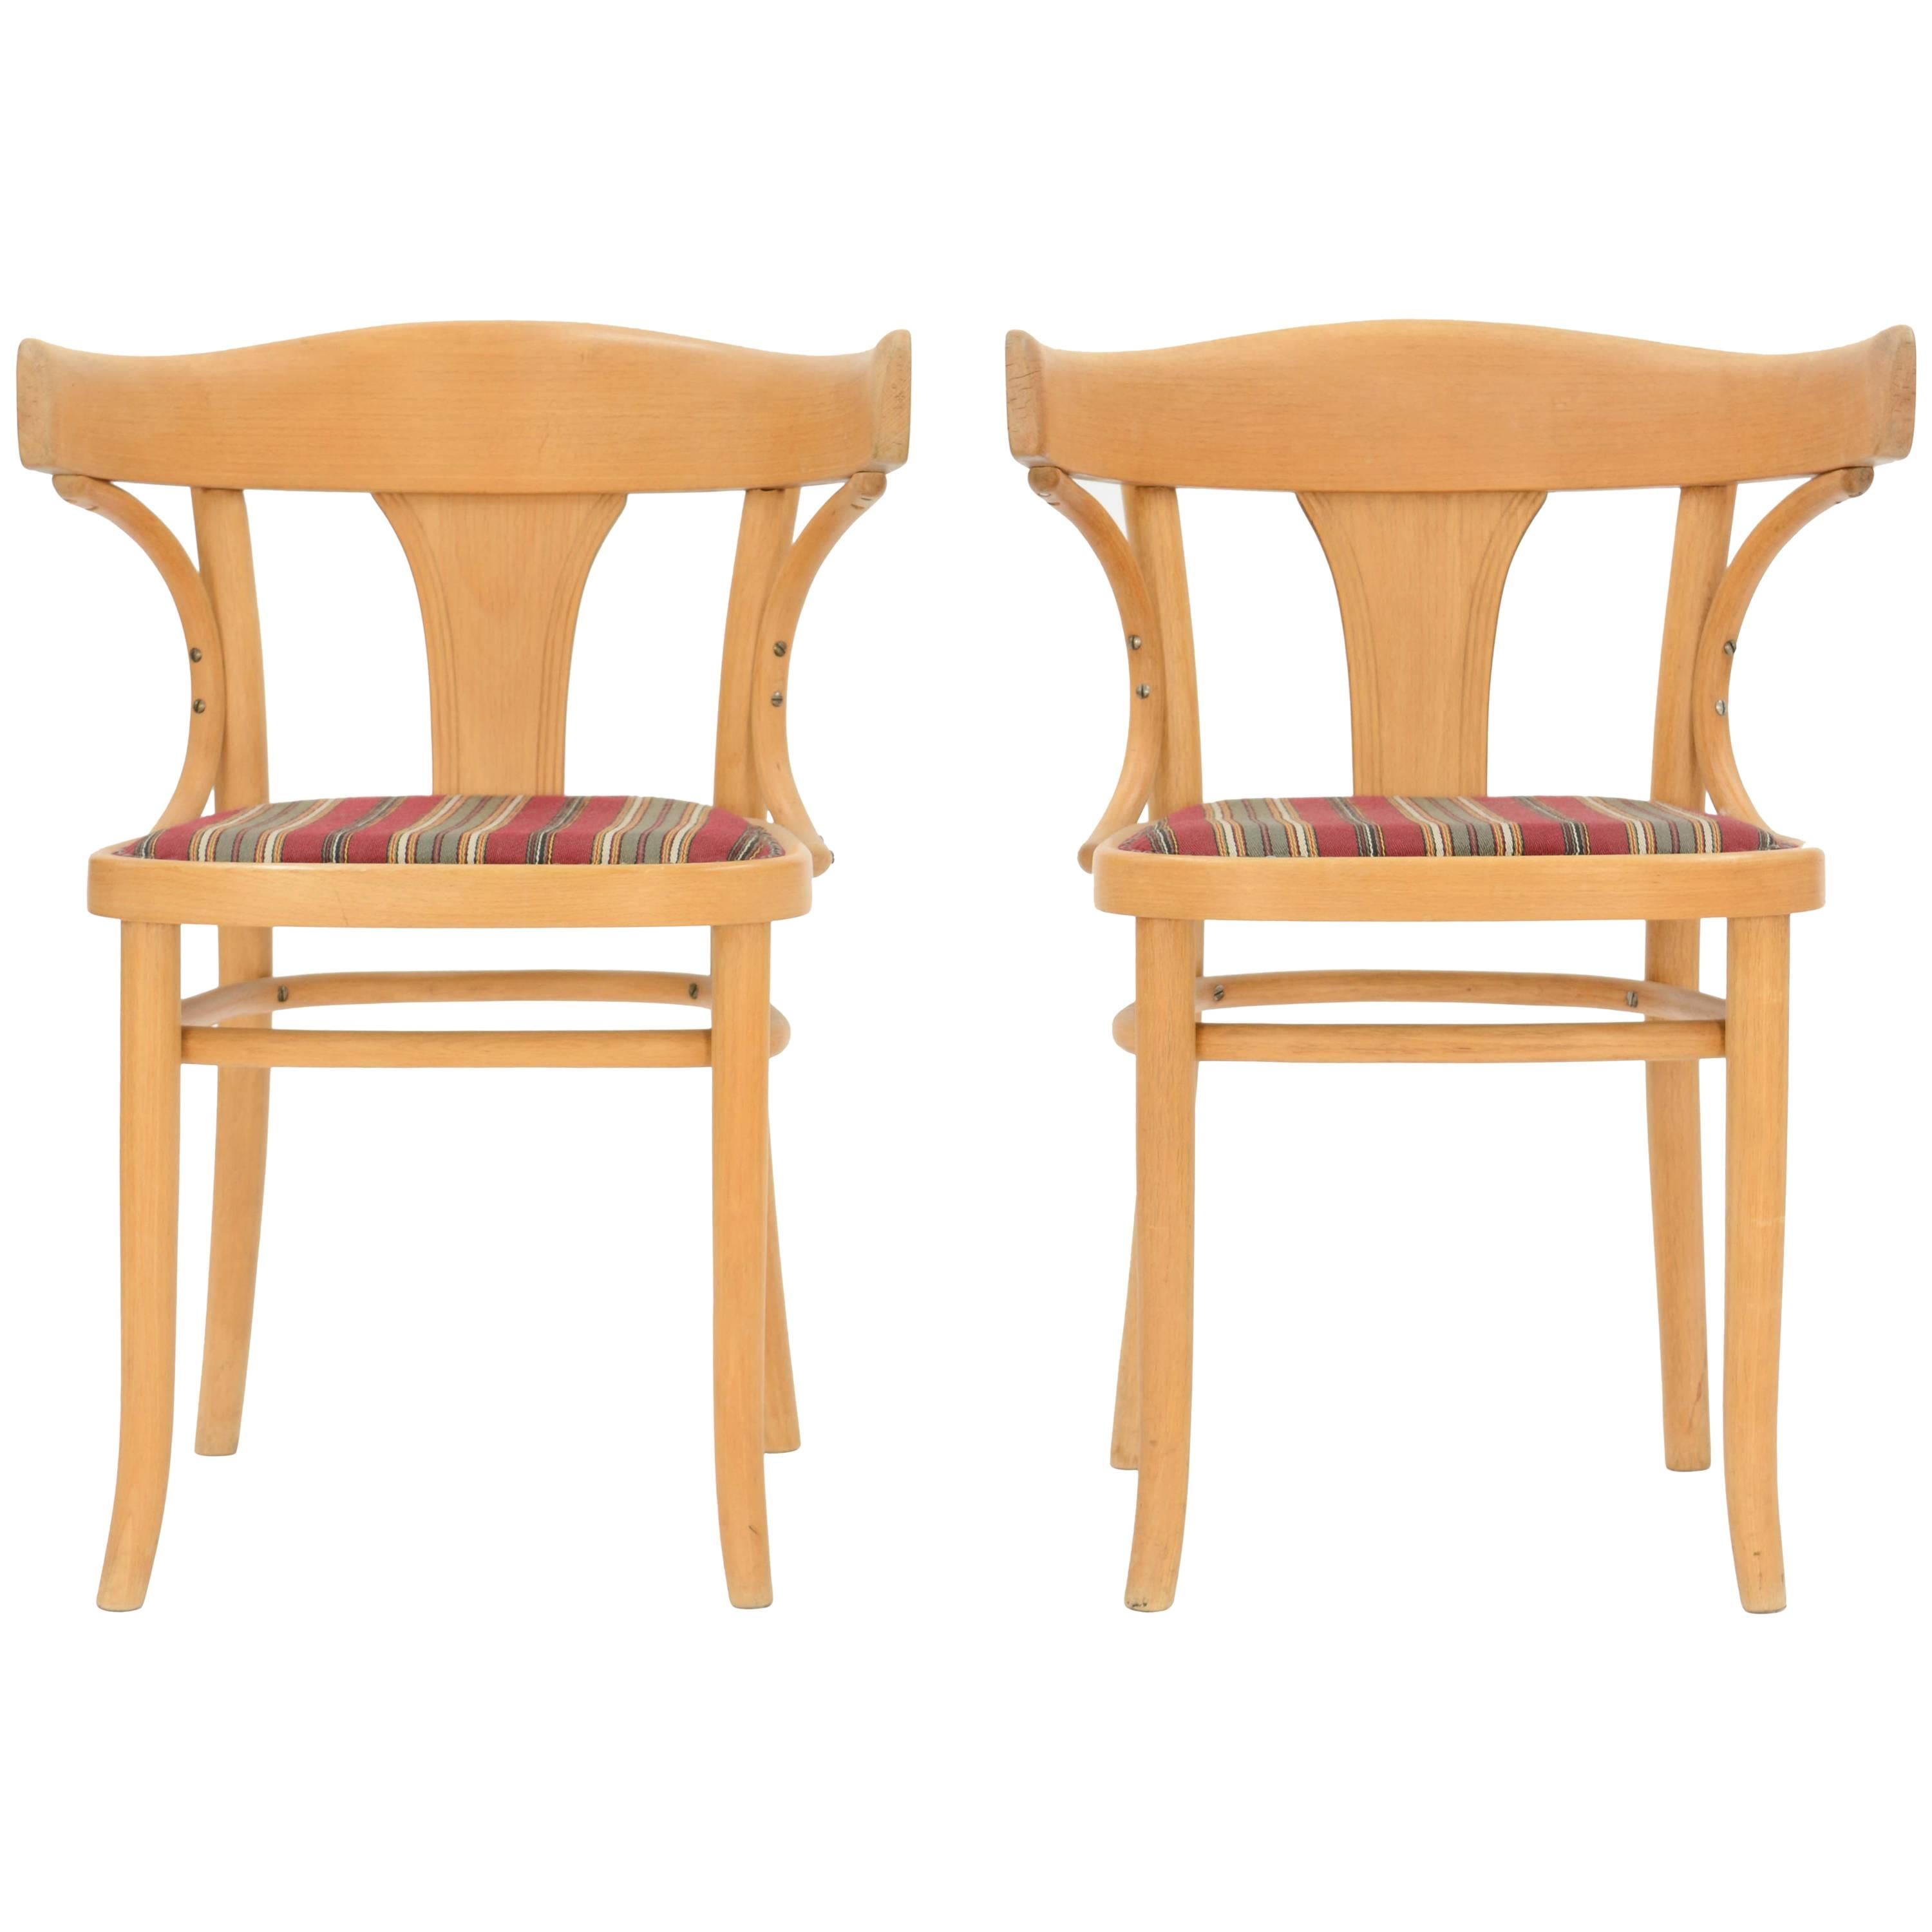 A Pair of Exquisite Austrian Bentwood Chairs by J & J Kohn For Sale